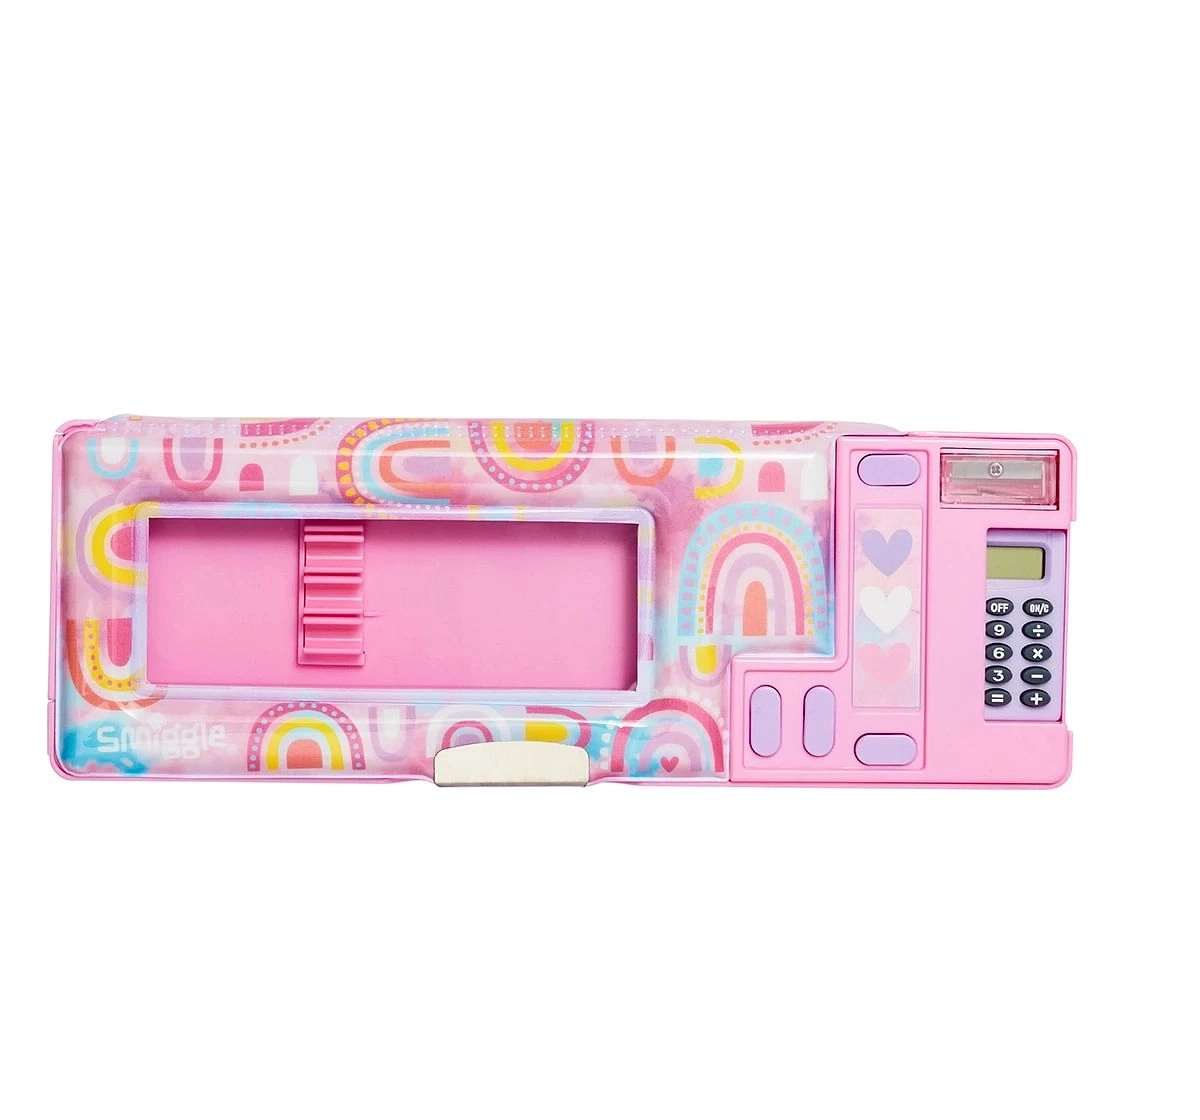 Smiggle Bright Side Pop Out Pencil Case with Calculator for Kids 3Y+, Pink